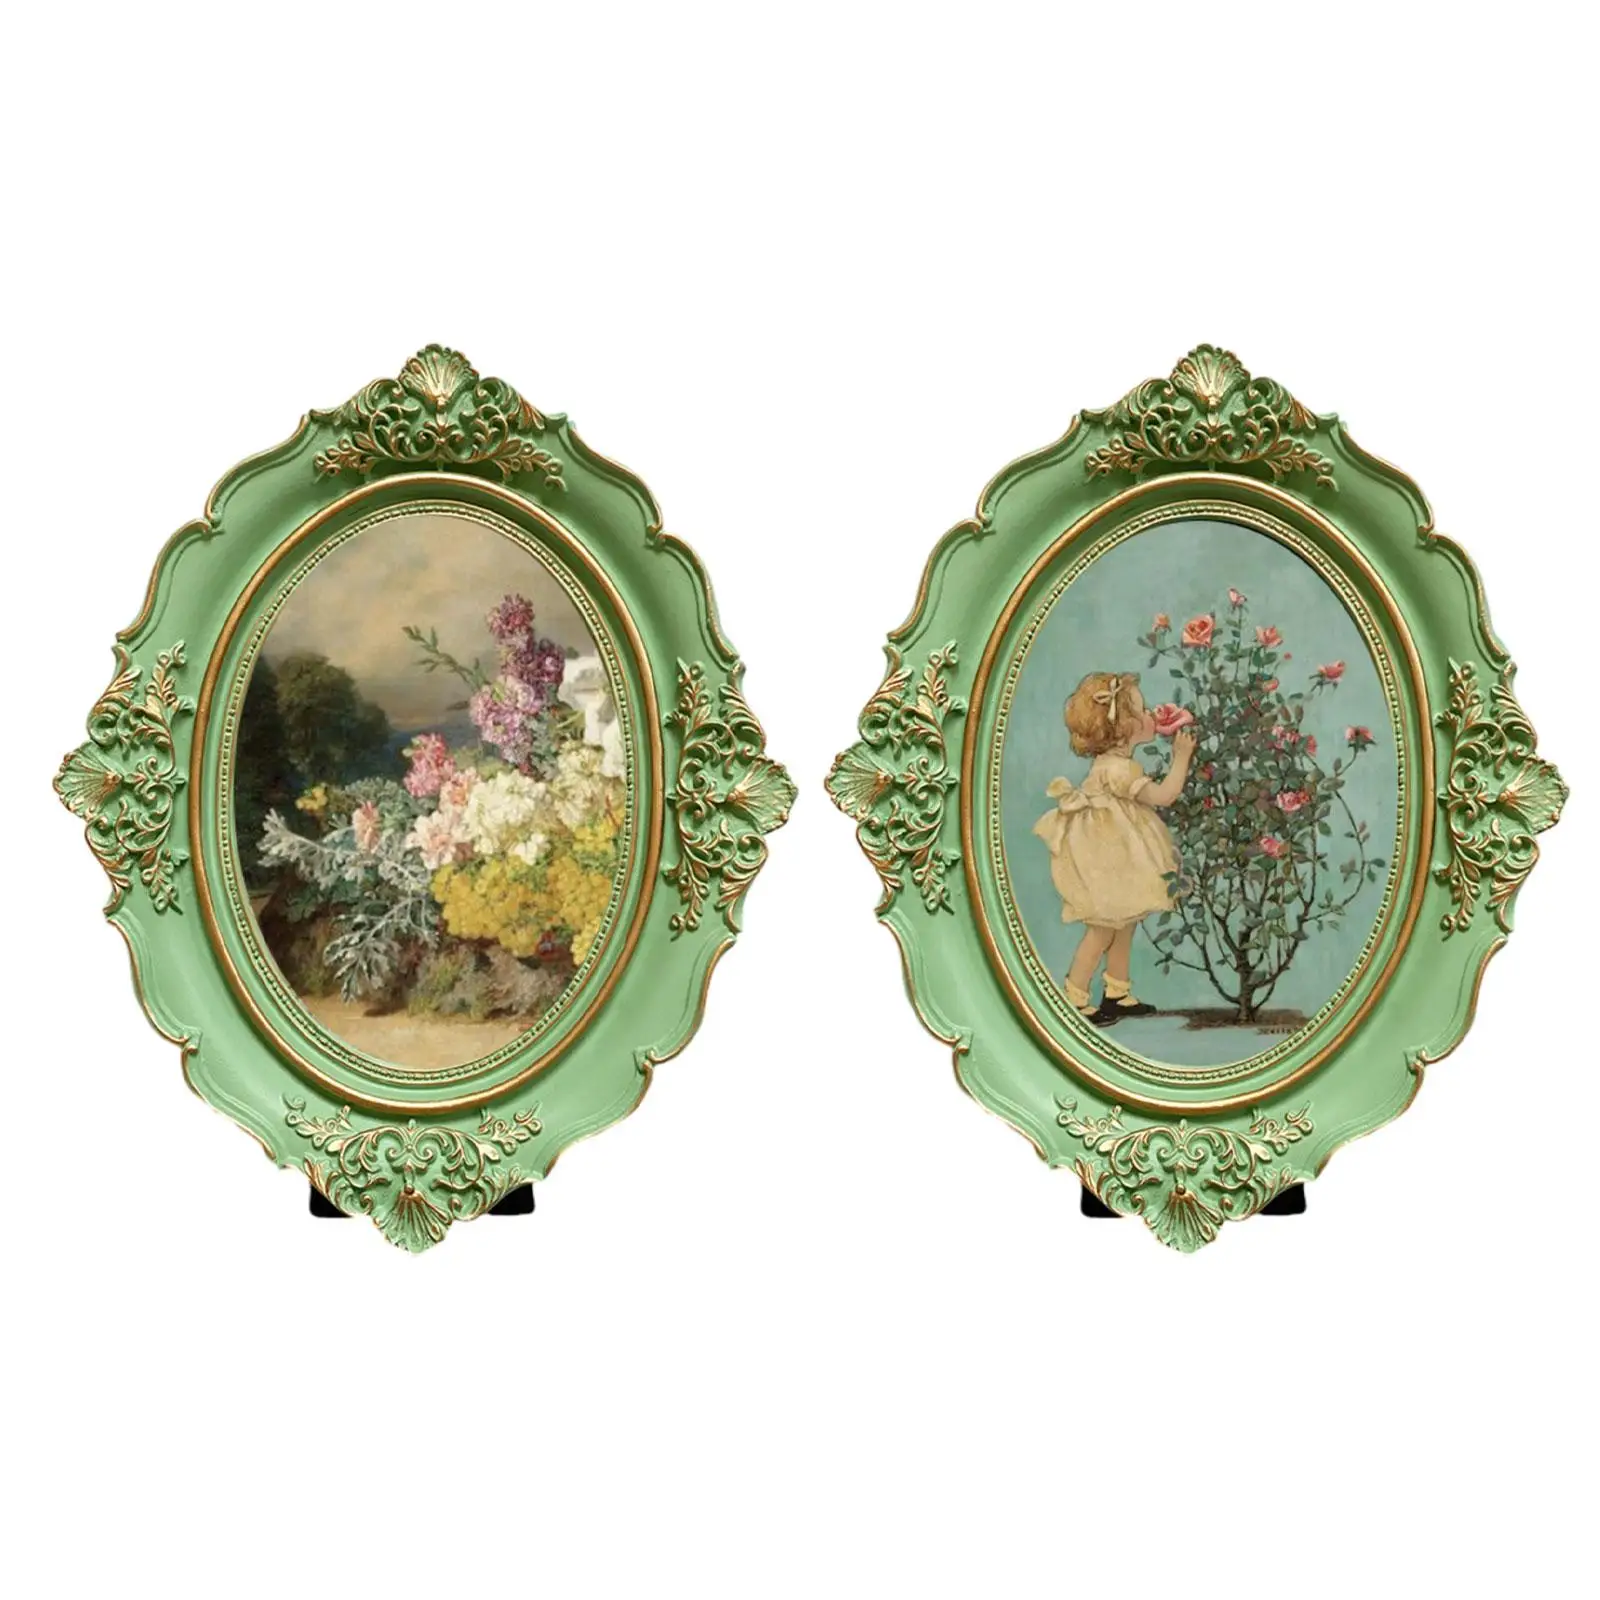 Picture Frame Oval Antique Retro Ornate Elegant Photo Holder Photo Gallery Art for Wall Table Living Room Hallway Home Decor